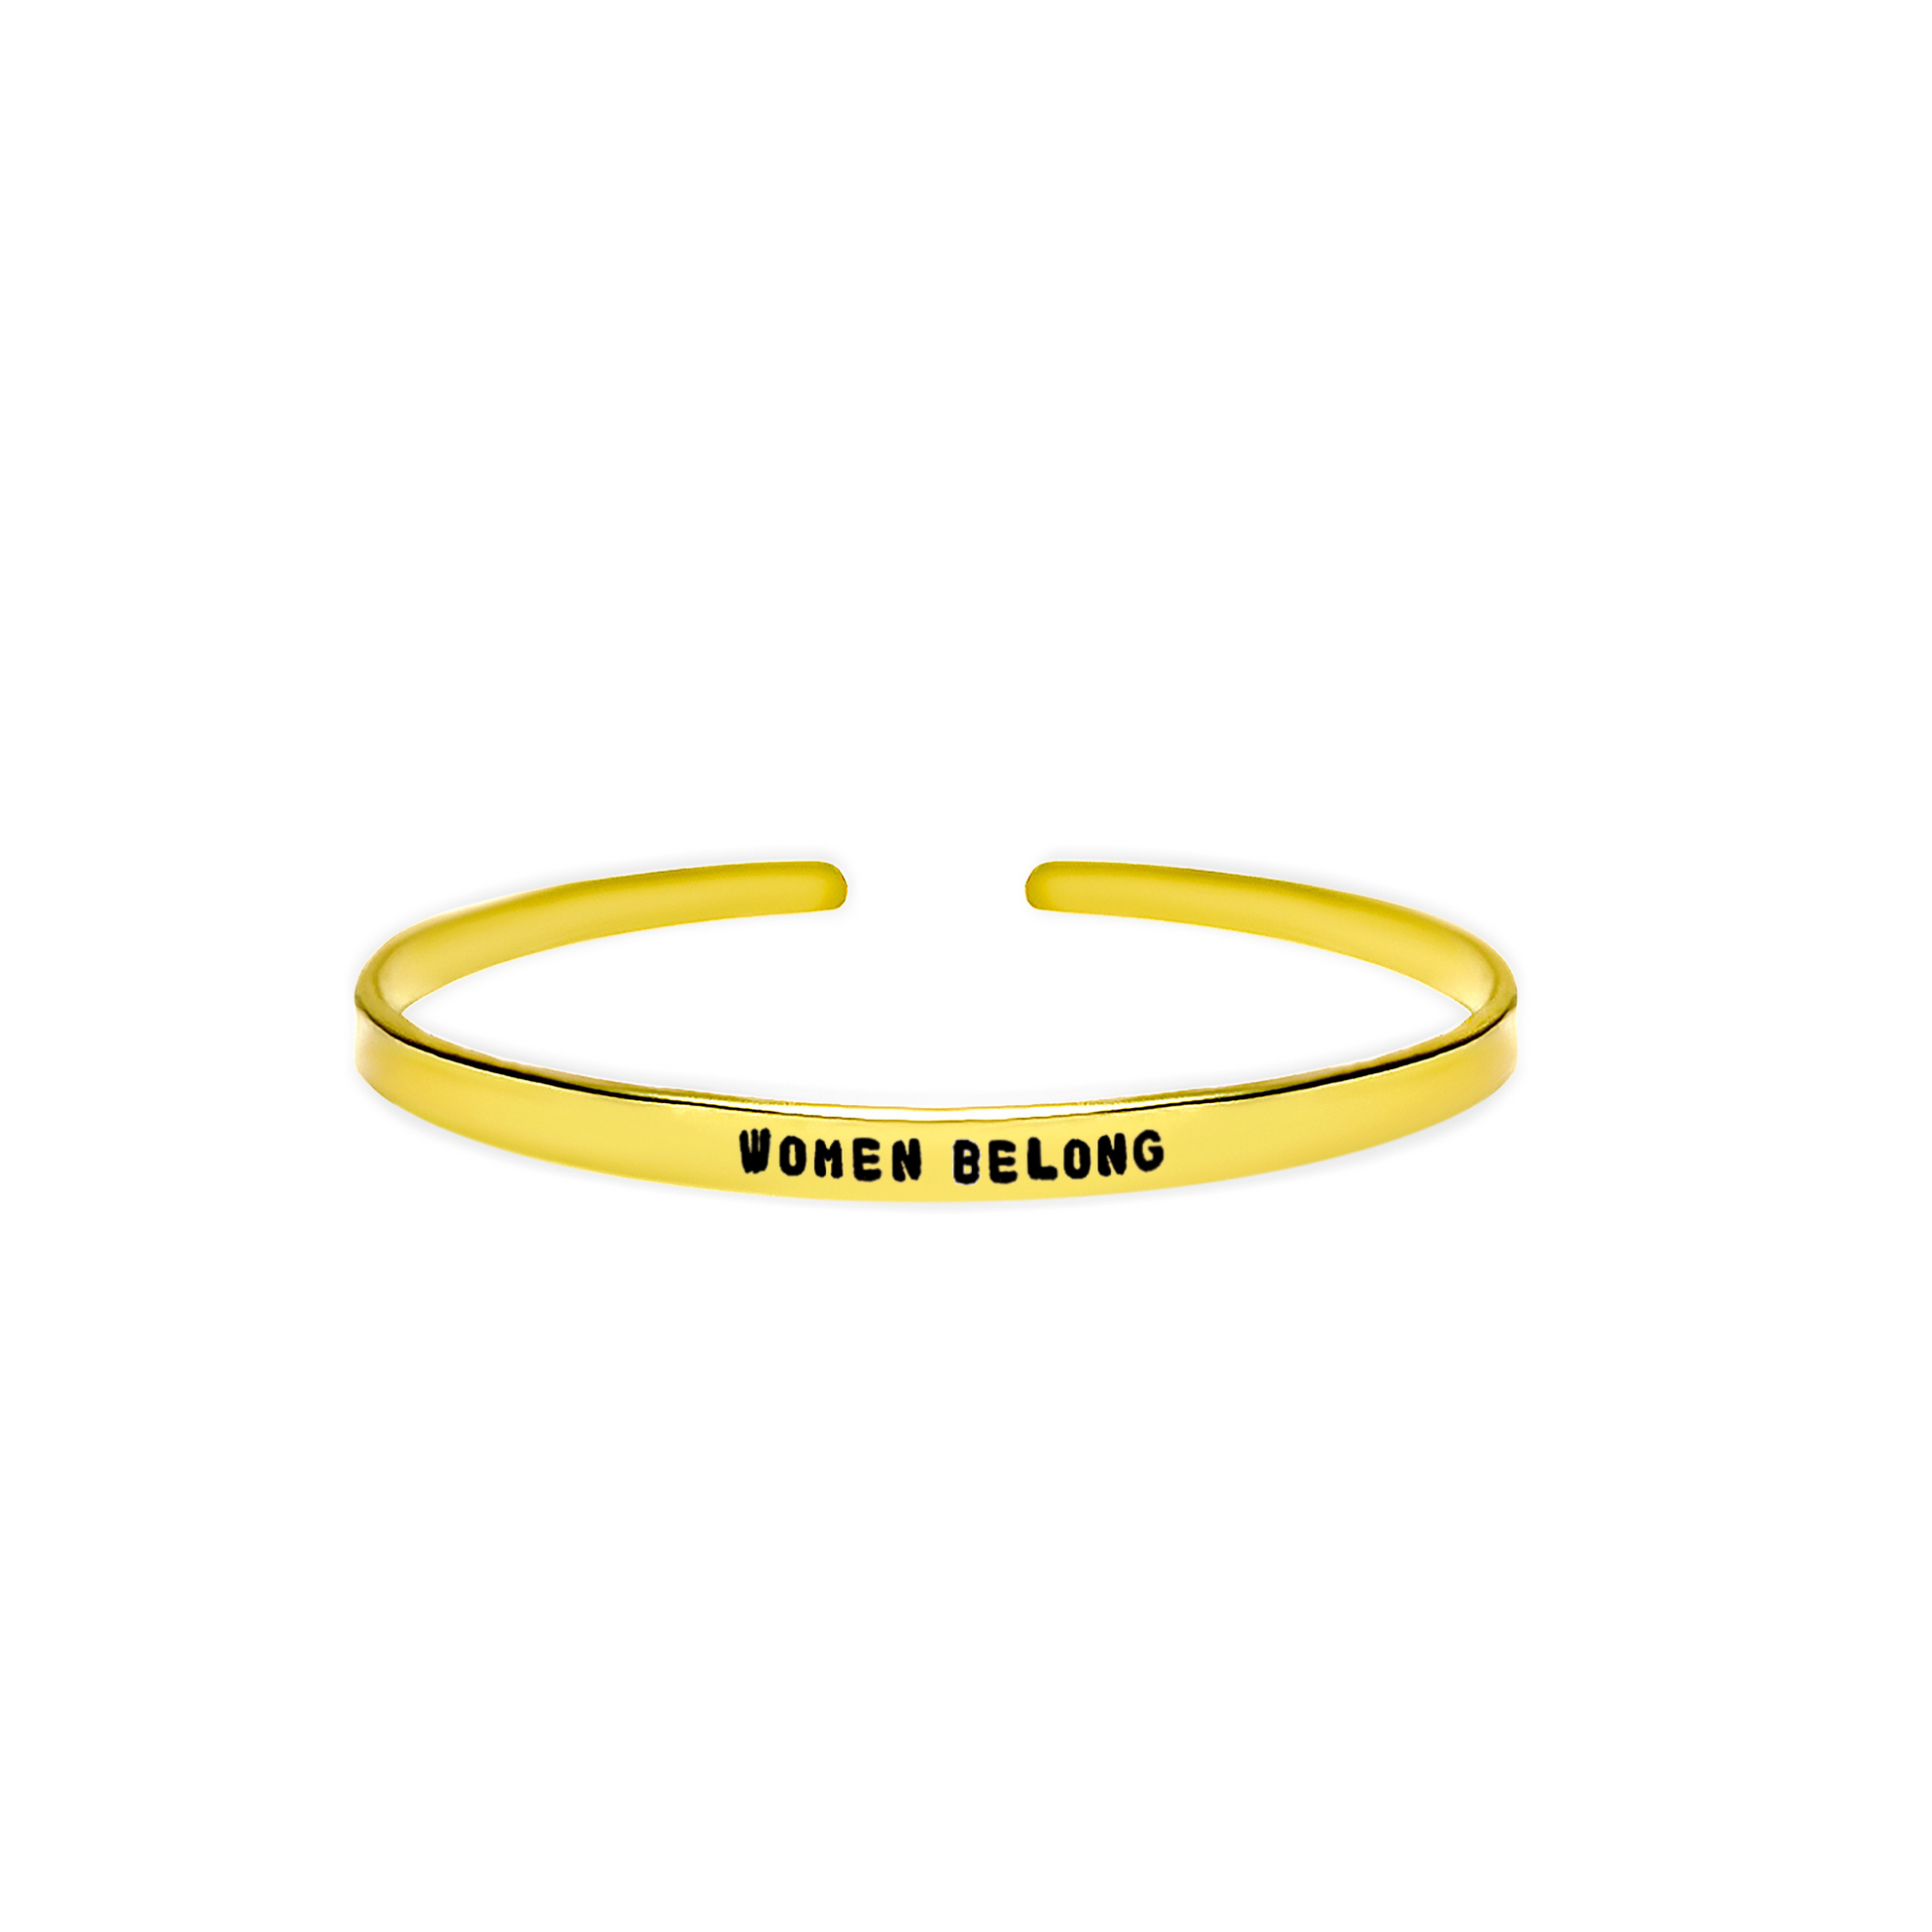 'Women belong' empowering bracelet for social equality for women and women's rights 